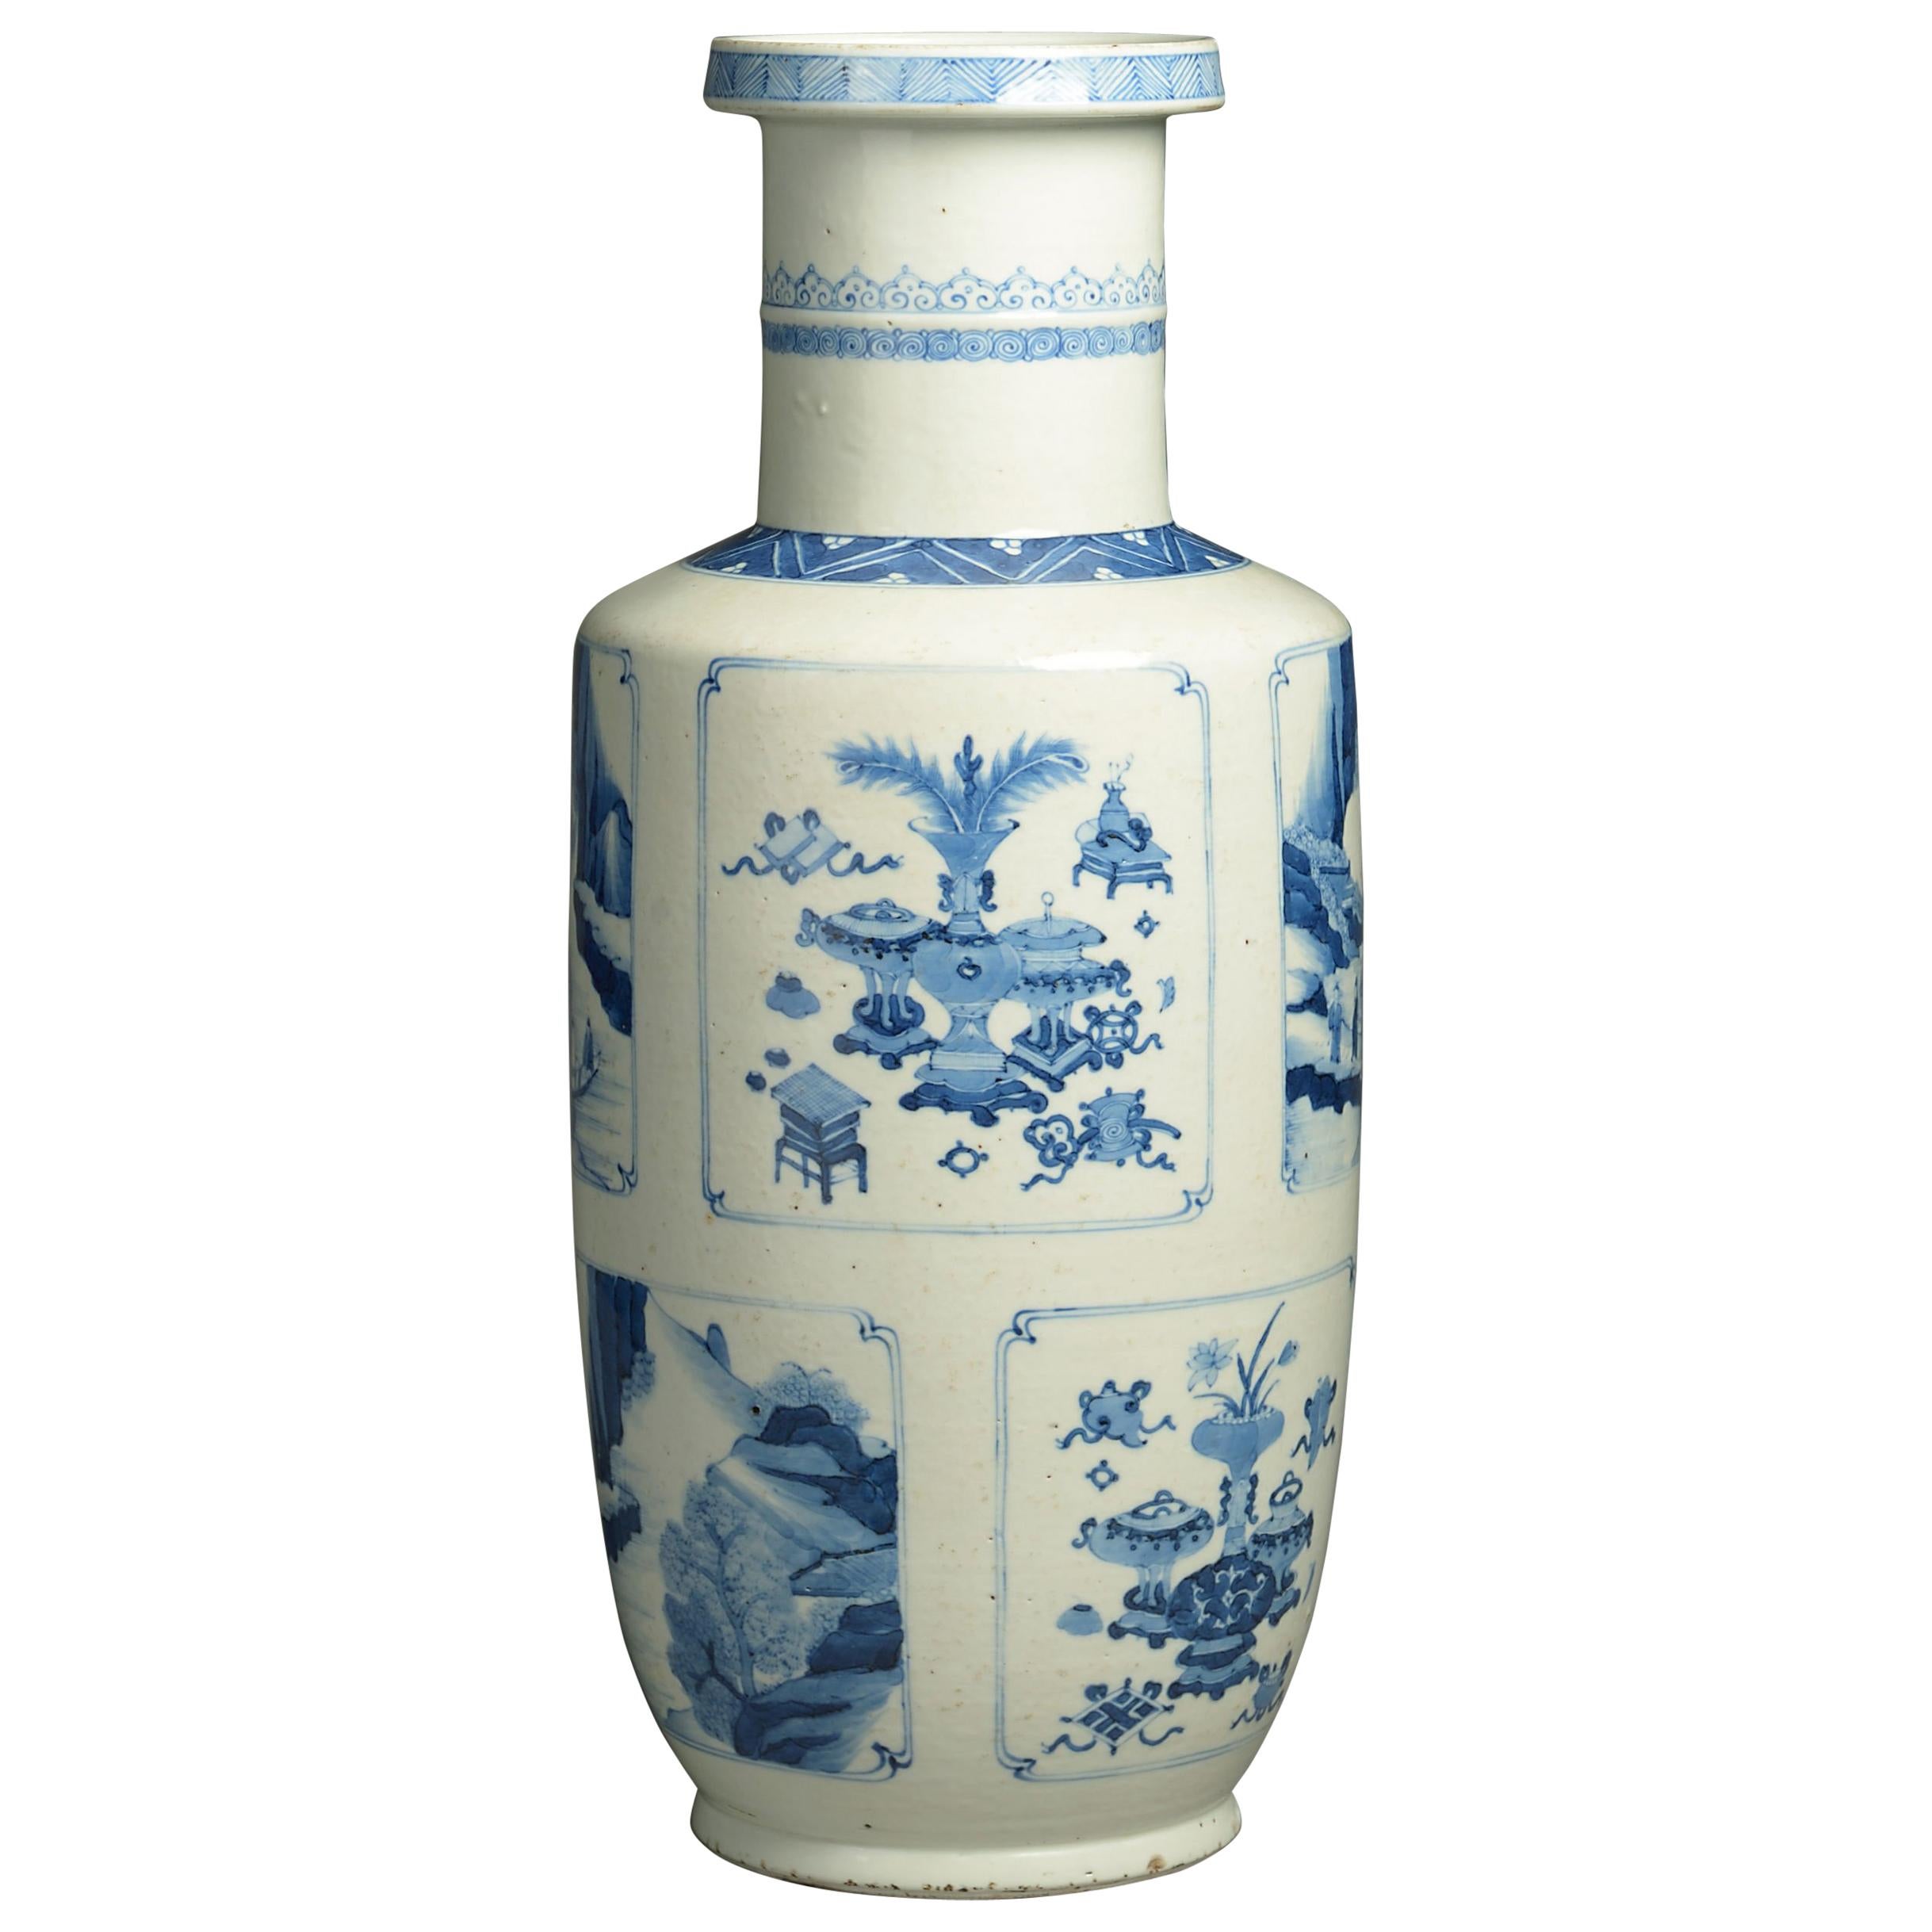 19th Century Blue and White Porcelain Rouleau Vase